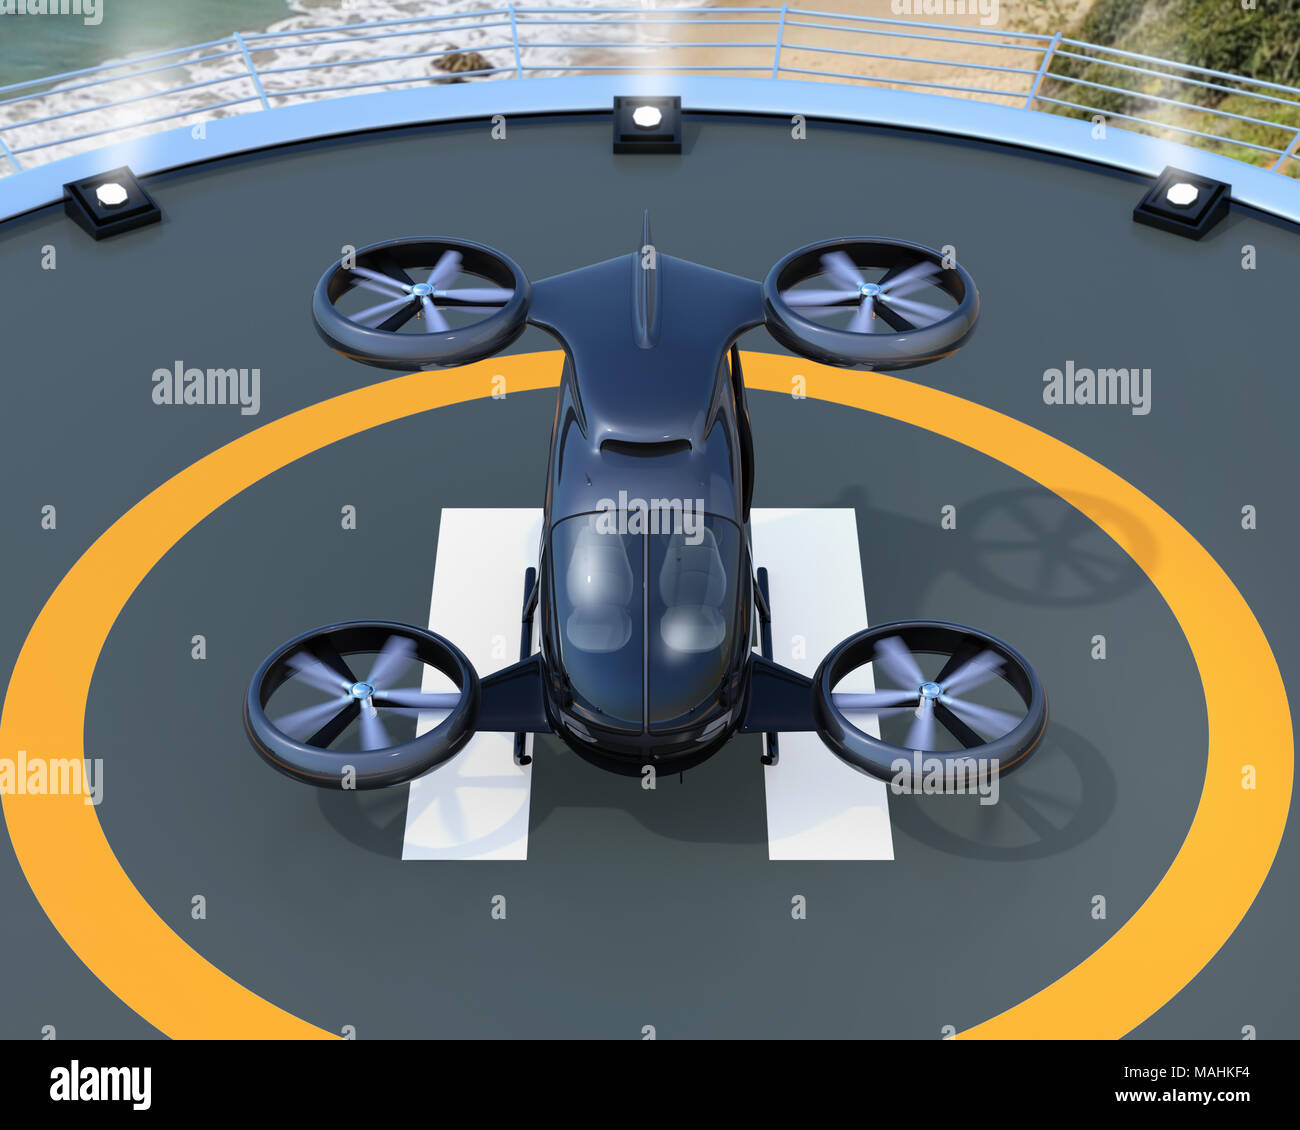 Front view of black self-driving passenger drone takeoff and landing on the  helipad. 3D rendering image Stock Photo - Alamy